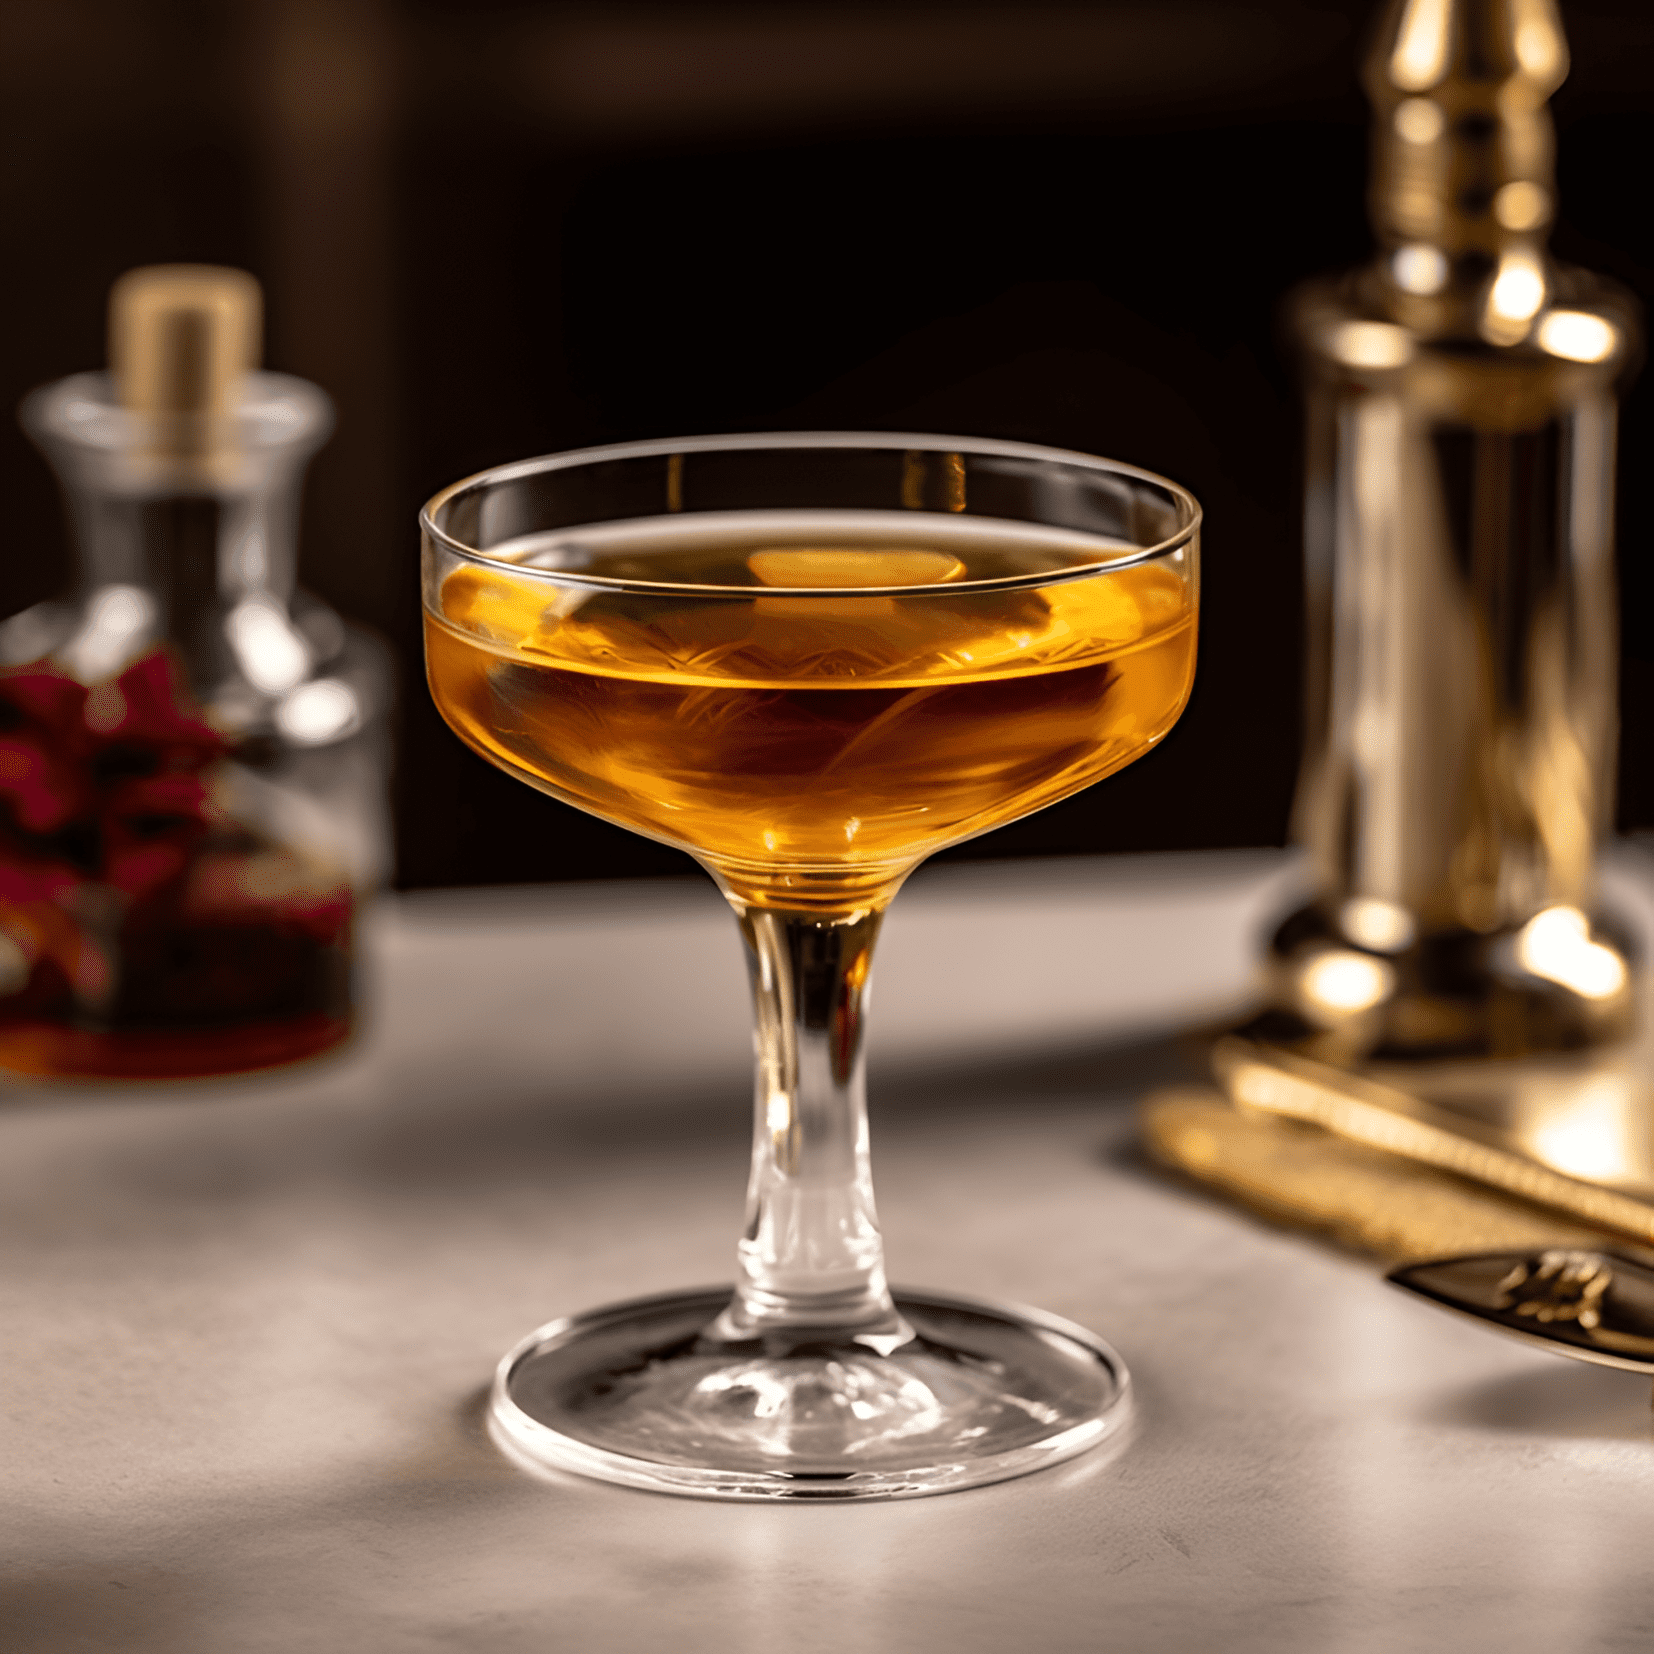 Highland Fling Cocktail Recipe - The Highland Fling cocktail is a bold, robust, and slightly sweet drink with a hint of citrus. The smoky and rich flavors of the Scotch whisky are balanced by the sweetness of the Drambuie and the tartness of the lemon juice, creating a complex and satisfying taste experience.